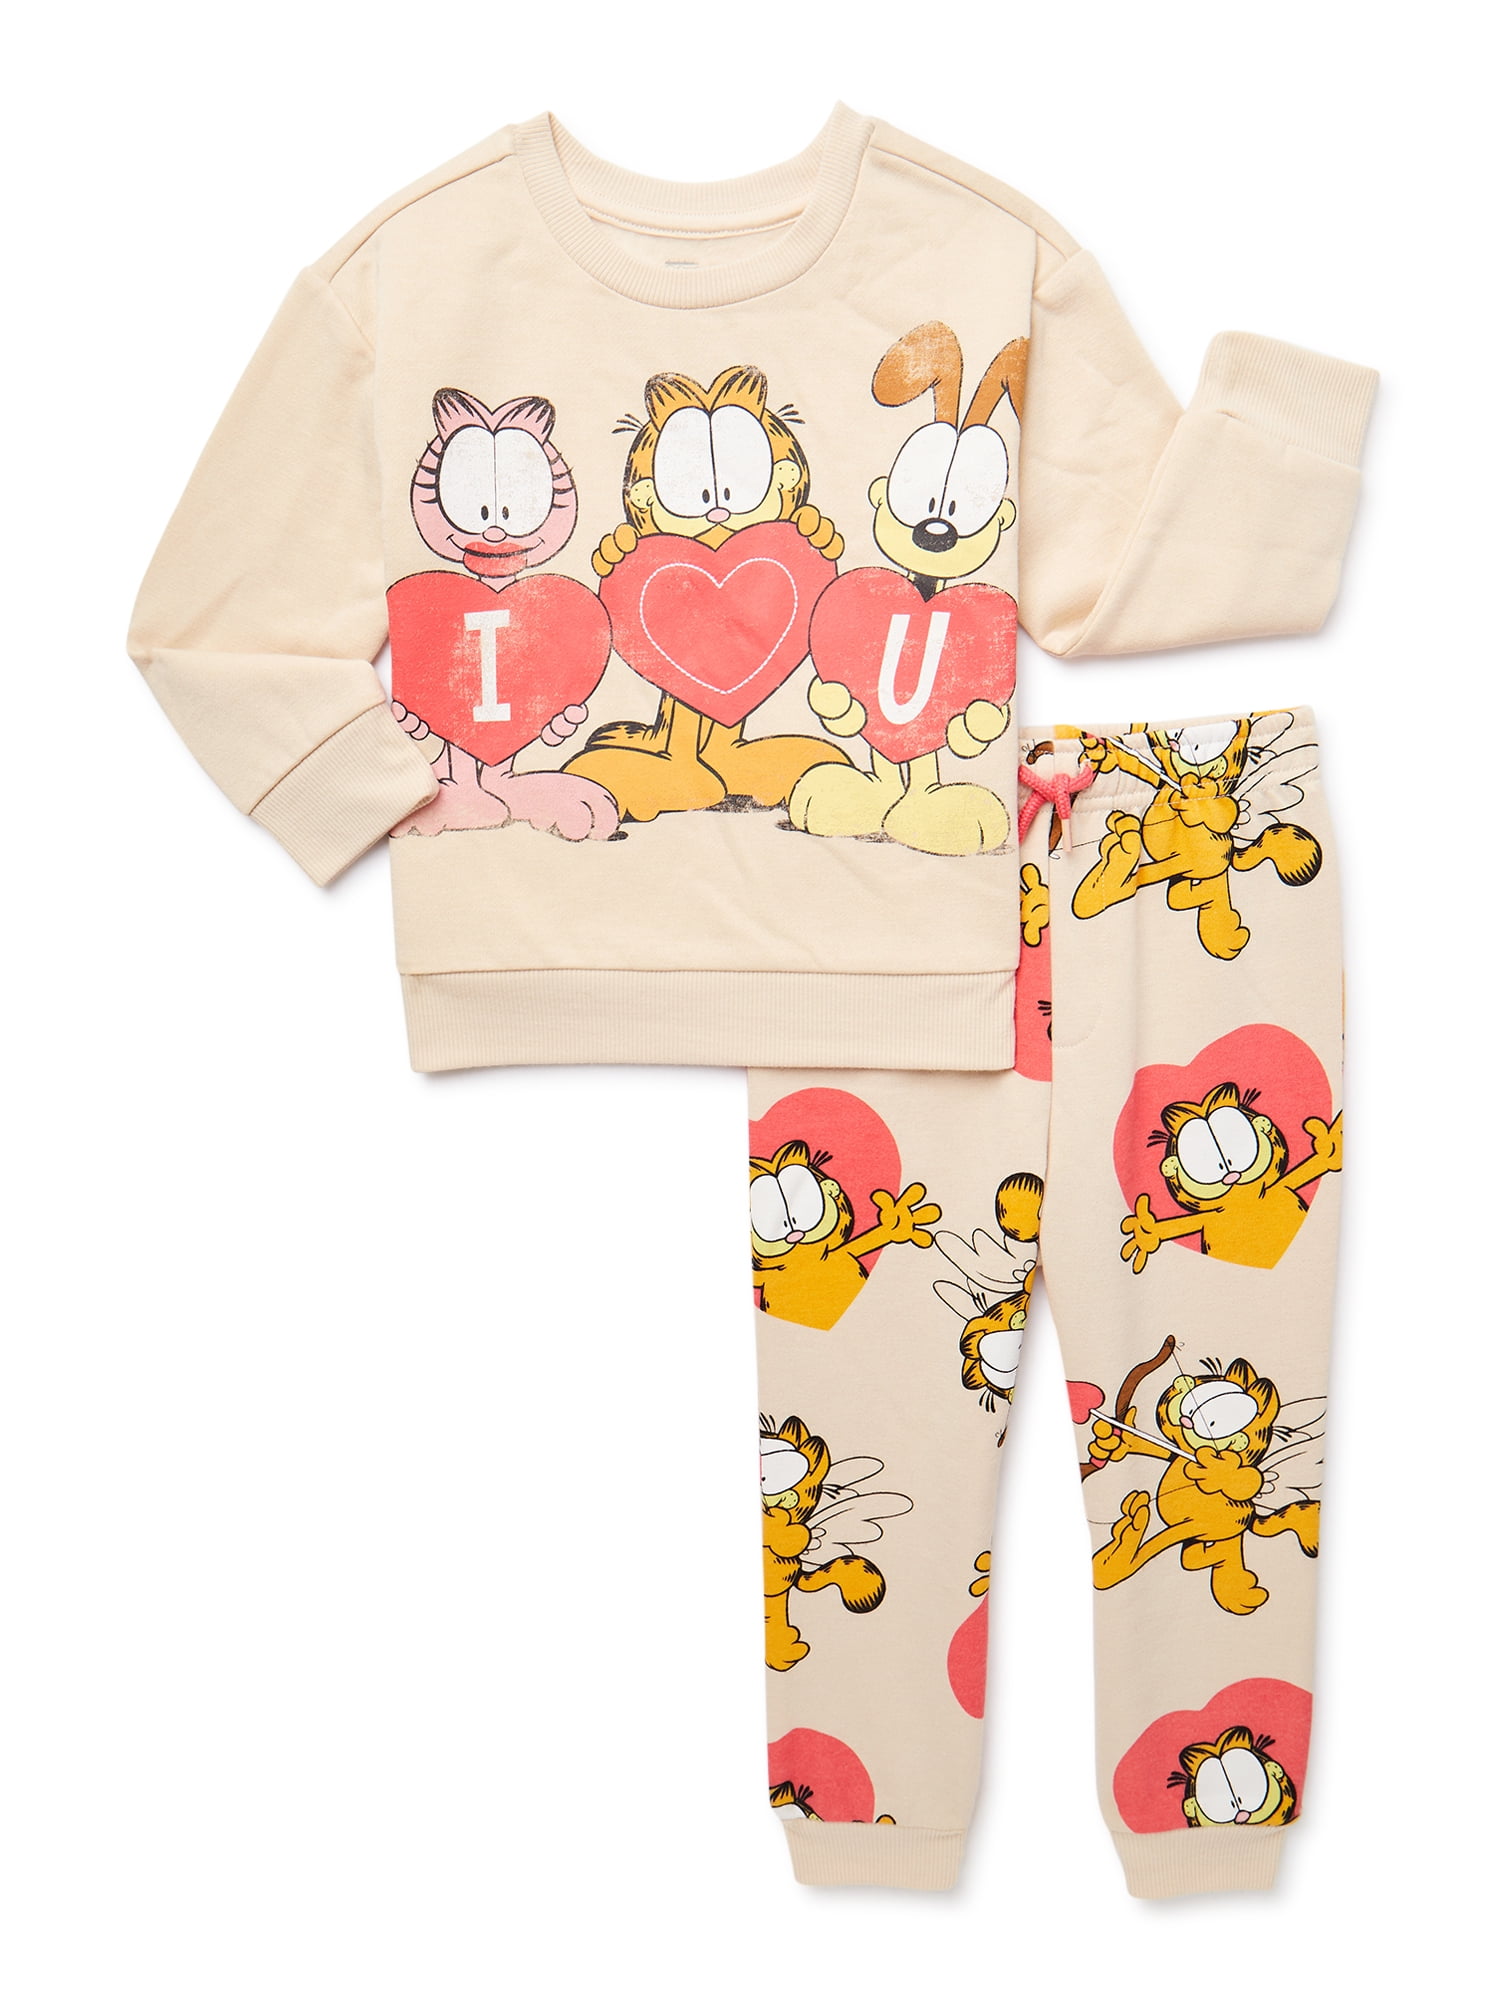 Toddler Sweethearts Valentine's Day Sweethearts Crewneck Sweatshirt and  Joggers Set, 2-Piece, Sizes 12M-5T